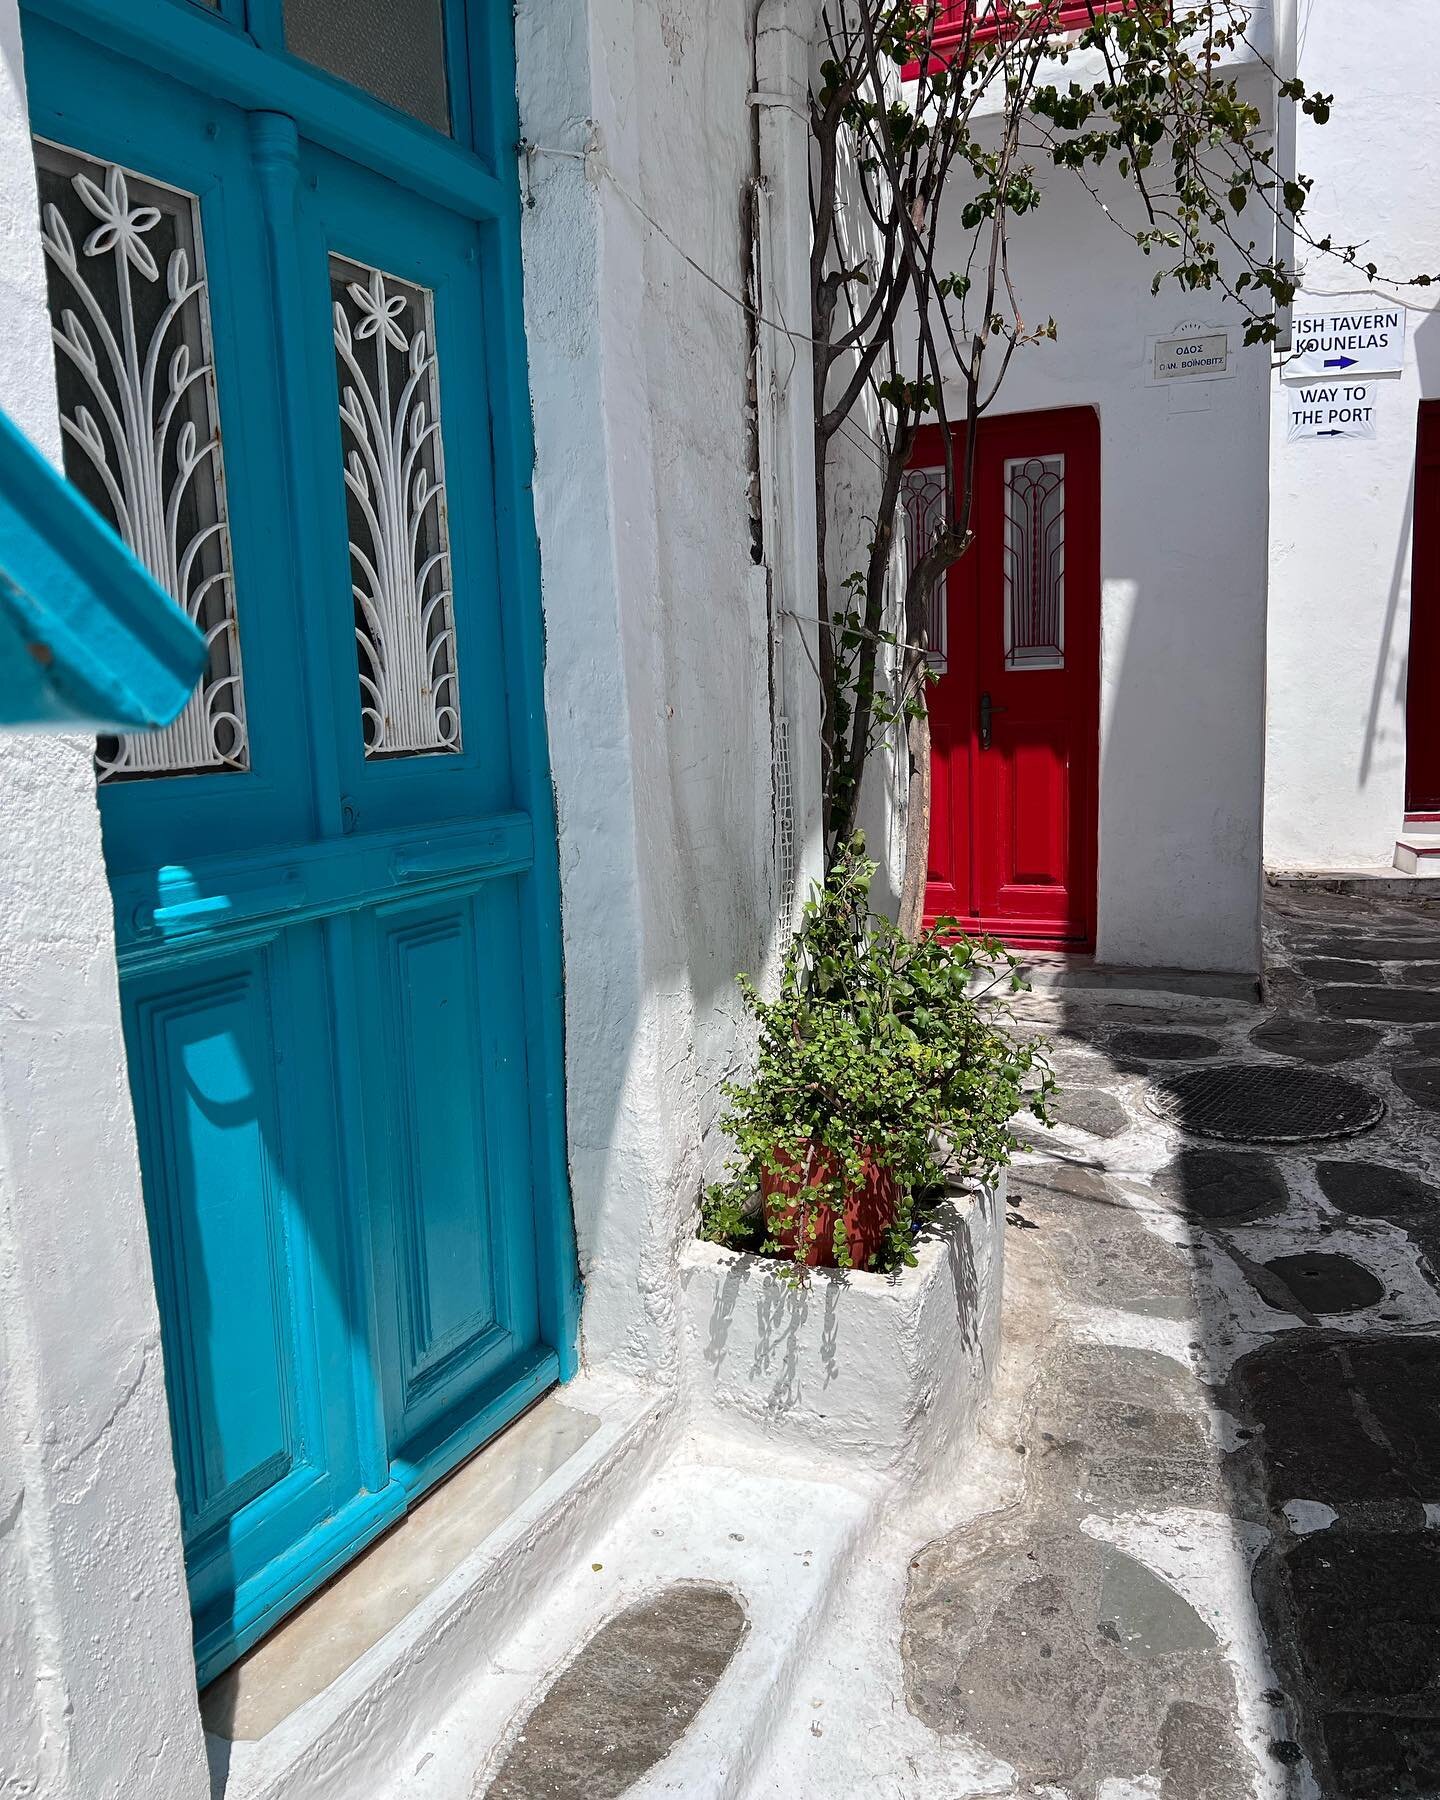 Most doors in the maze of streets in Mykonos, Greece are painted a beautiful bright color. Next to the freshly painted Lyme white walls&hellip;just stunning. #artistinvacation #celebritycruises #artforsalebyartist